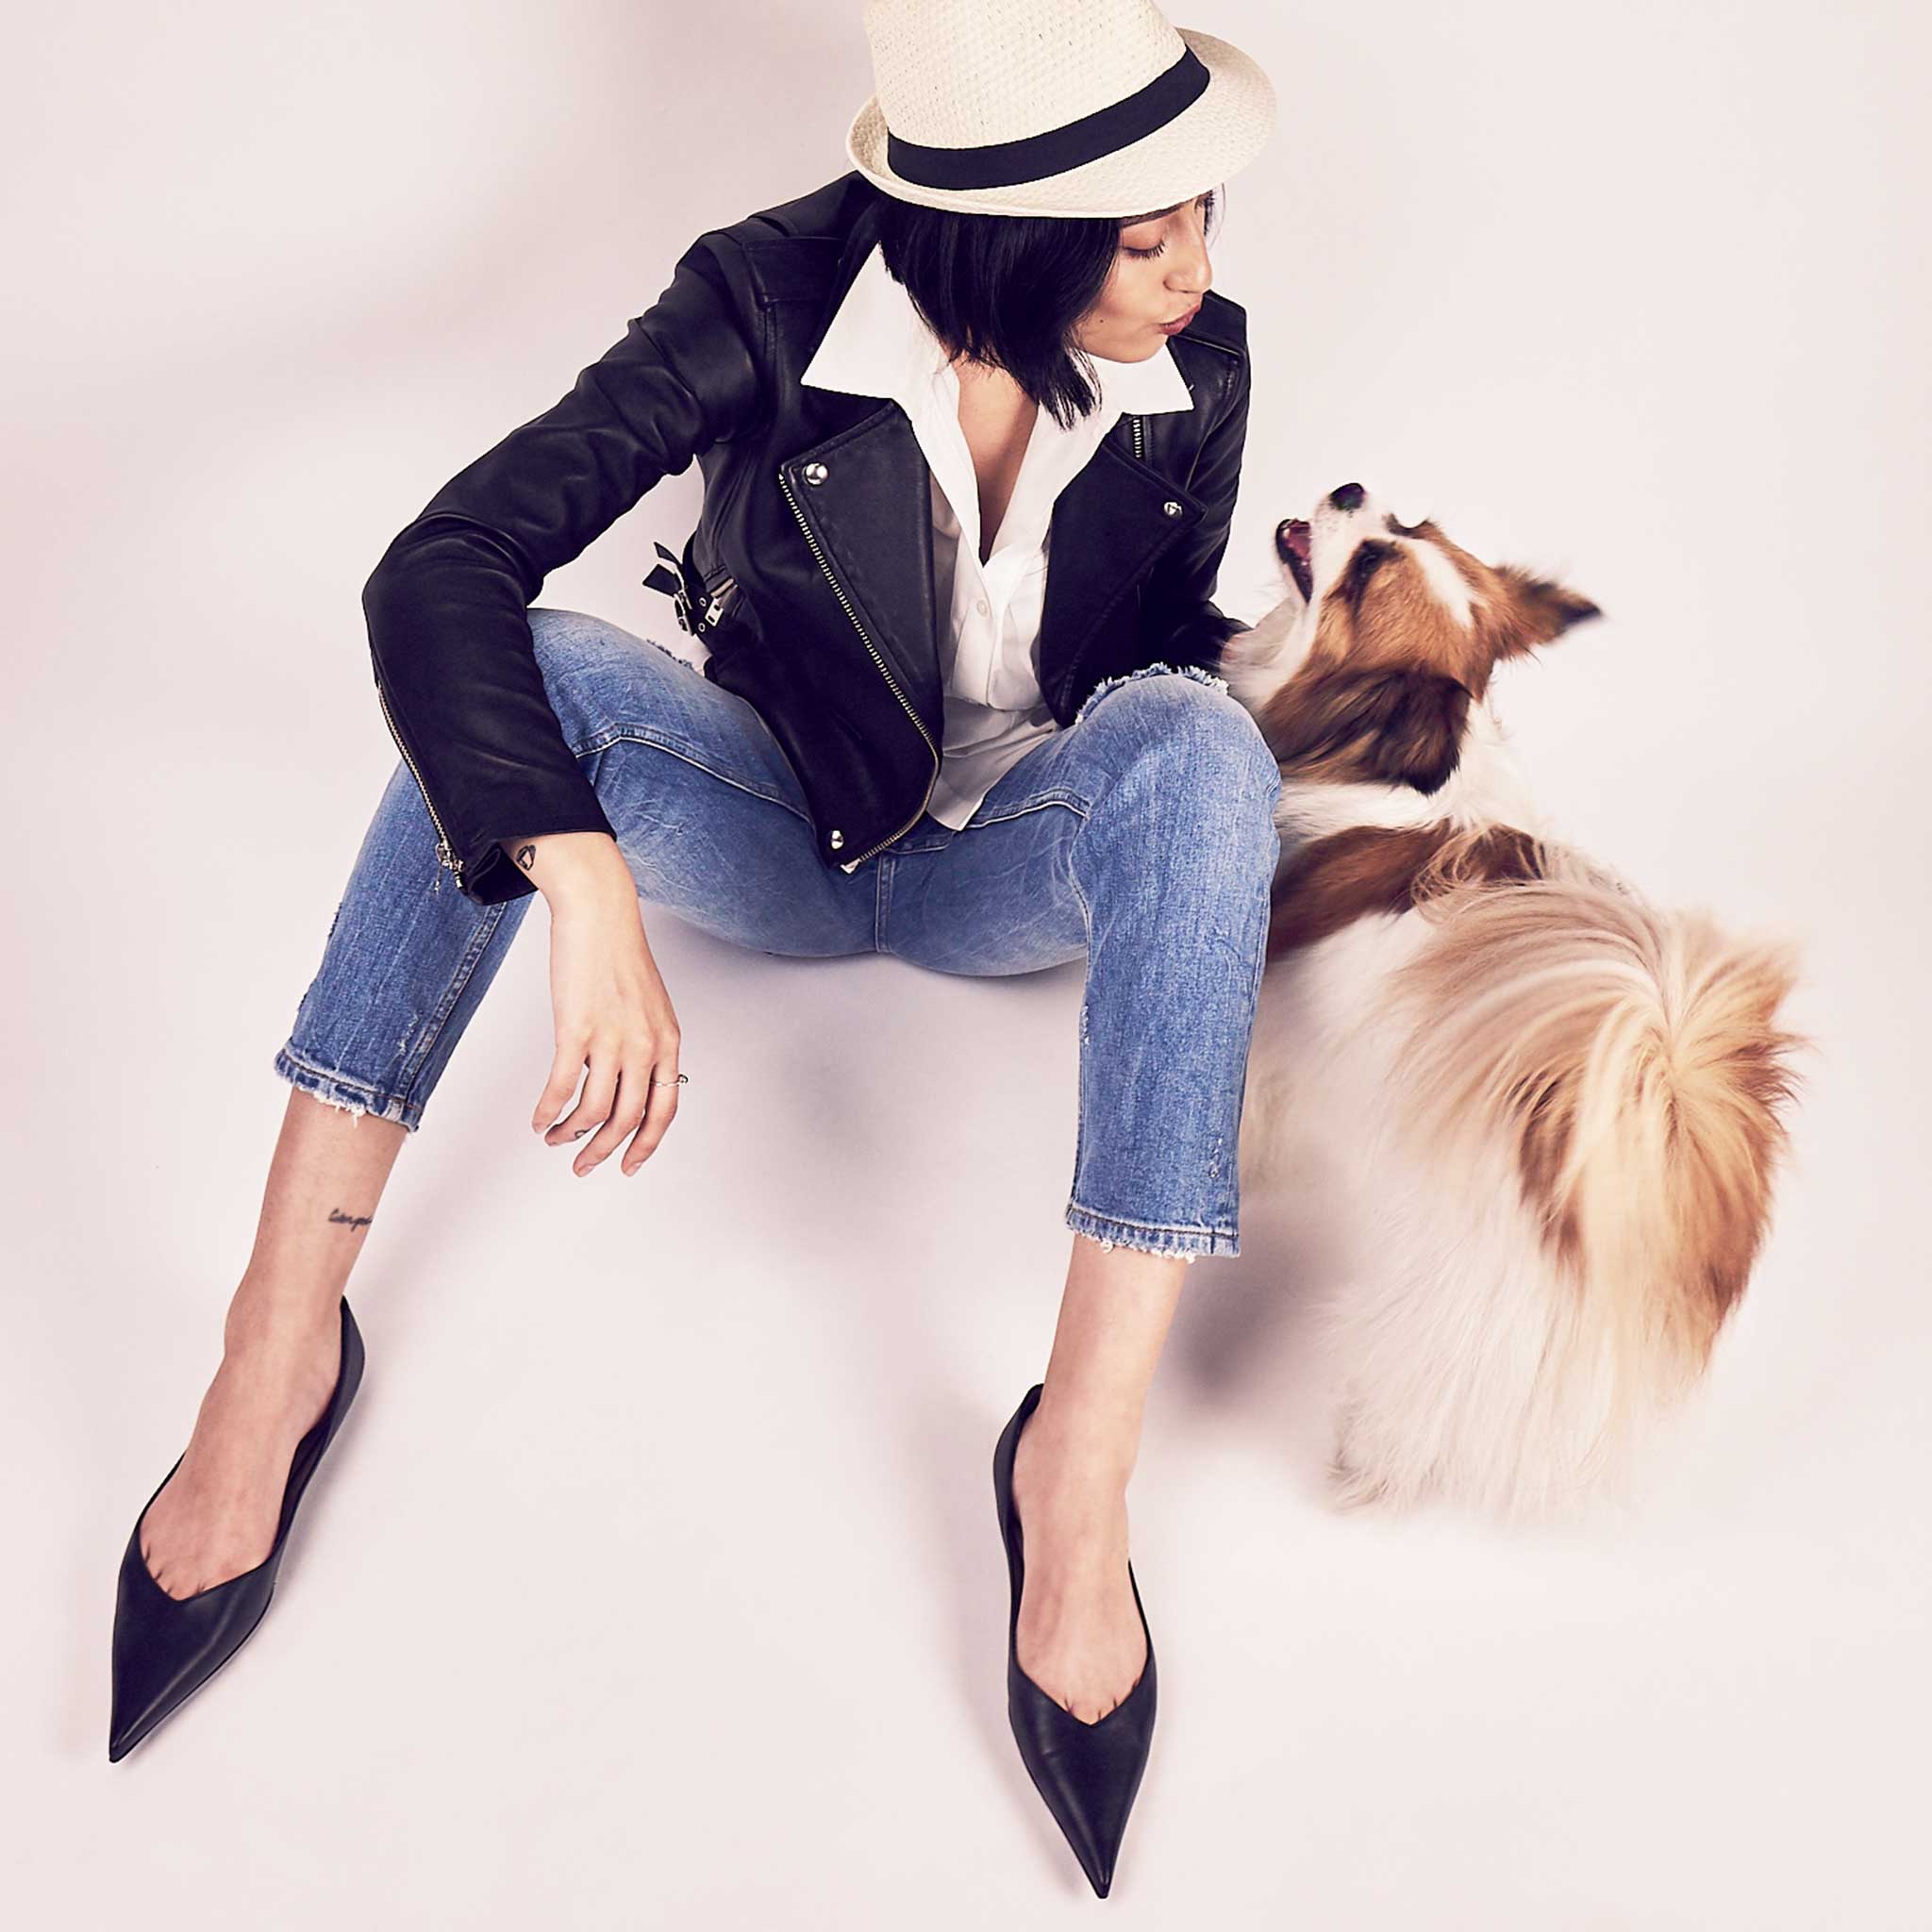 a woman wearing a cream colored fedora, black IRO leather biker jacket, Zara peg leg denim blue jeans and black leather flat shoes with super pointed toe making a kissy face at a small Tibetan spaniel dog who is smiling